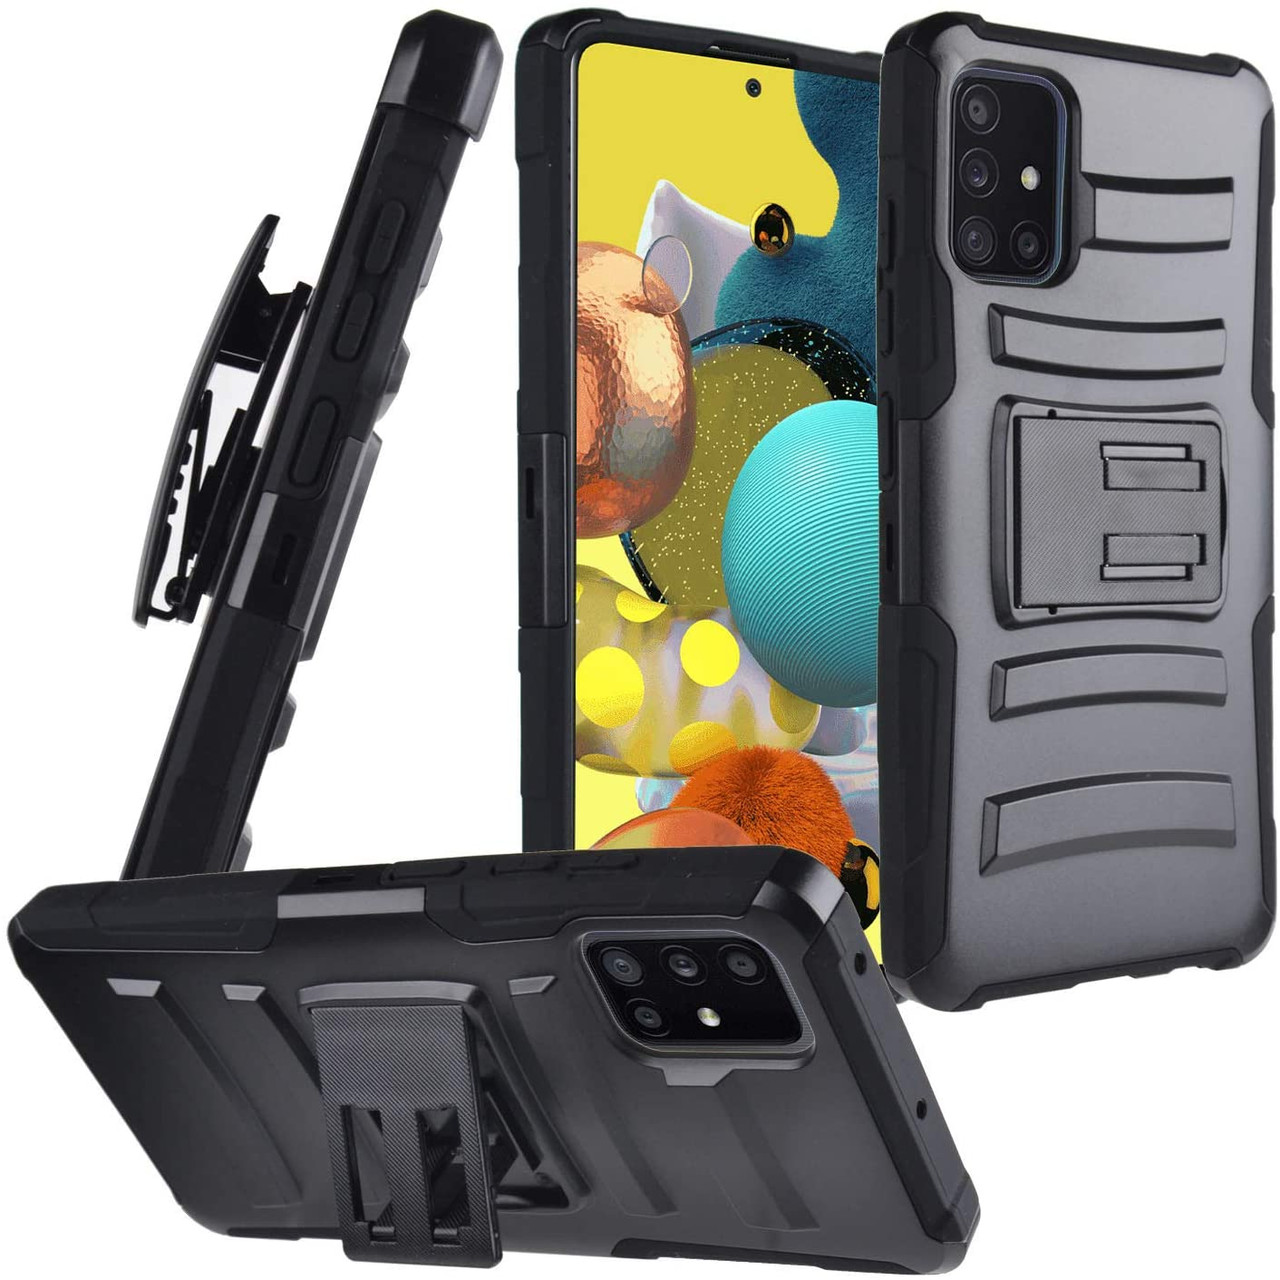 Kickstand Samsung A51 Holster Case ZASE Belt Clip Case for Galaxy A51 Tough Super Slim Rugged Protective Cover Armor Defender Strong Belt Clip A Black Holster Combo Case 